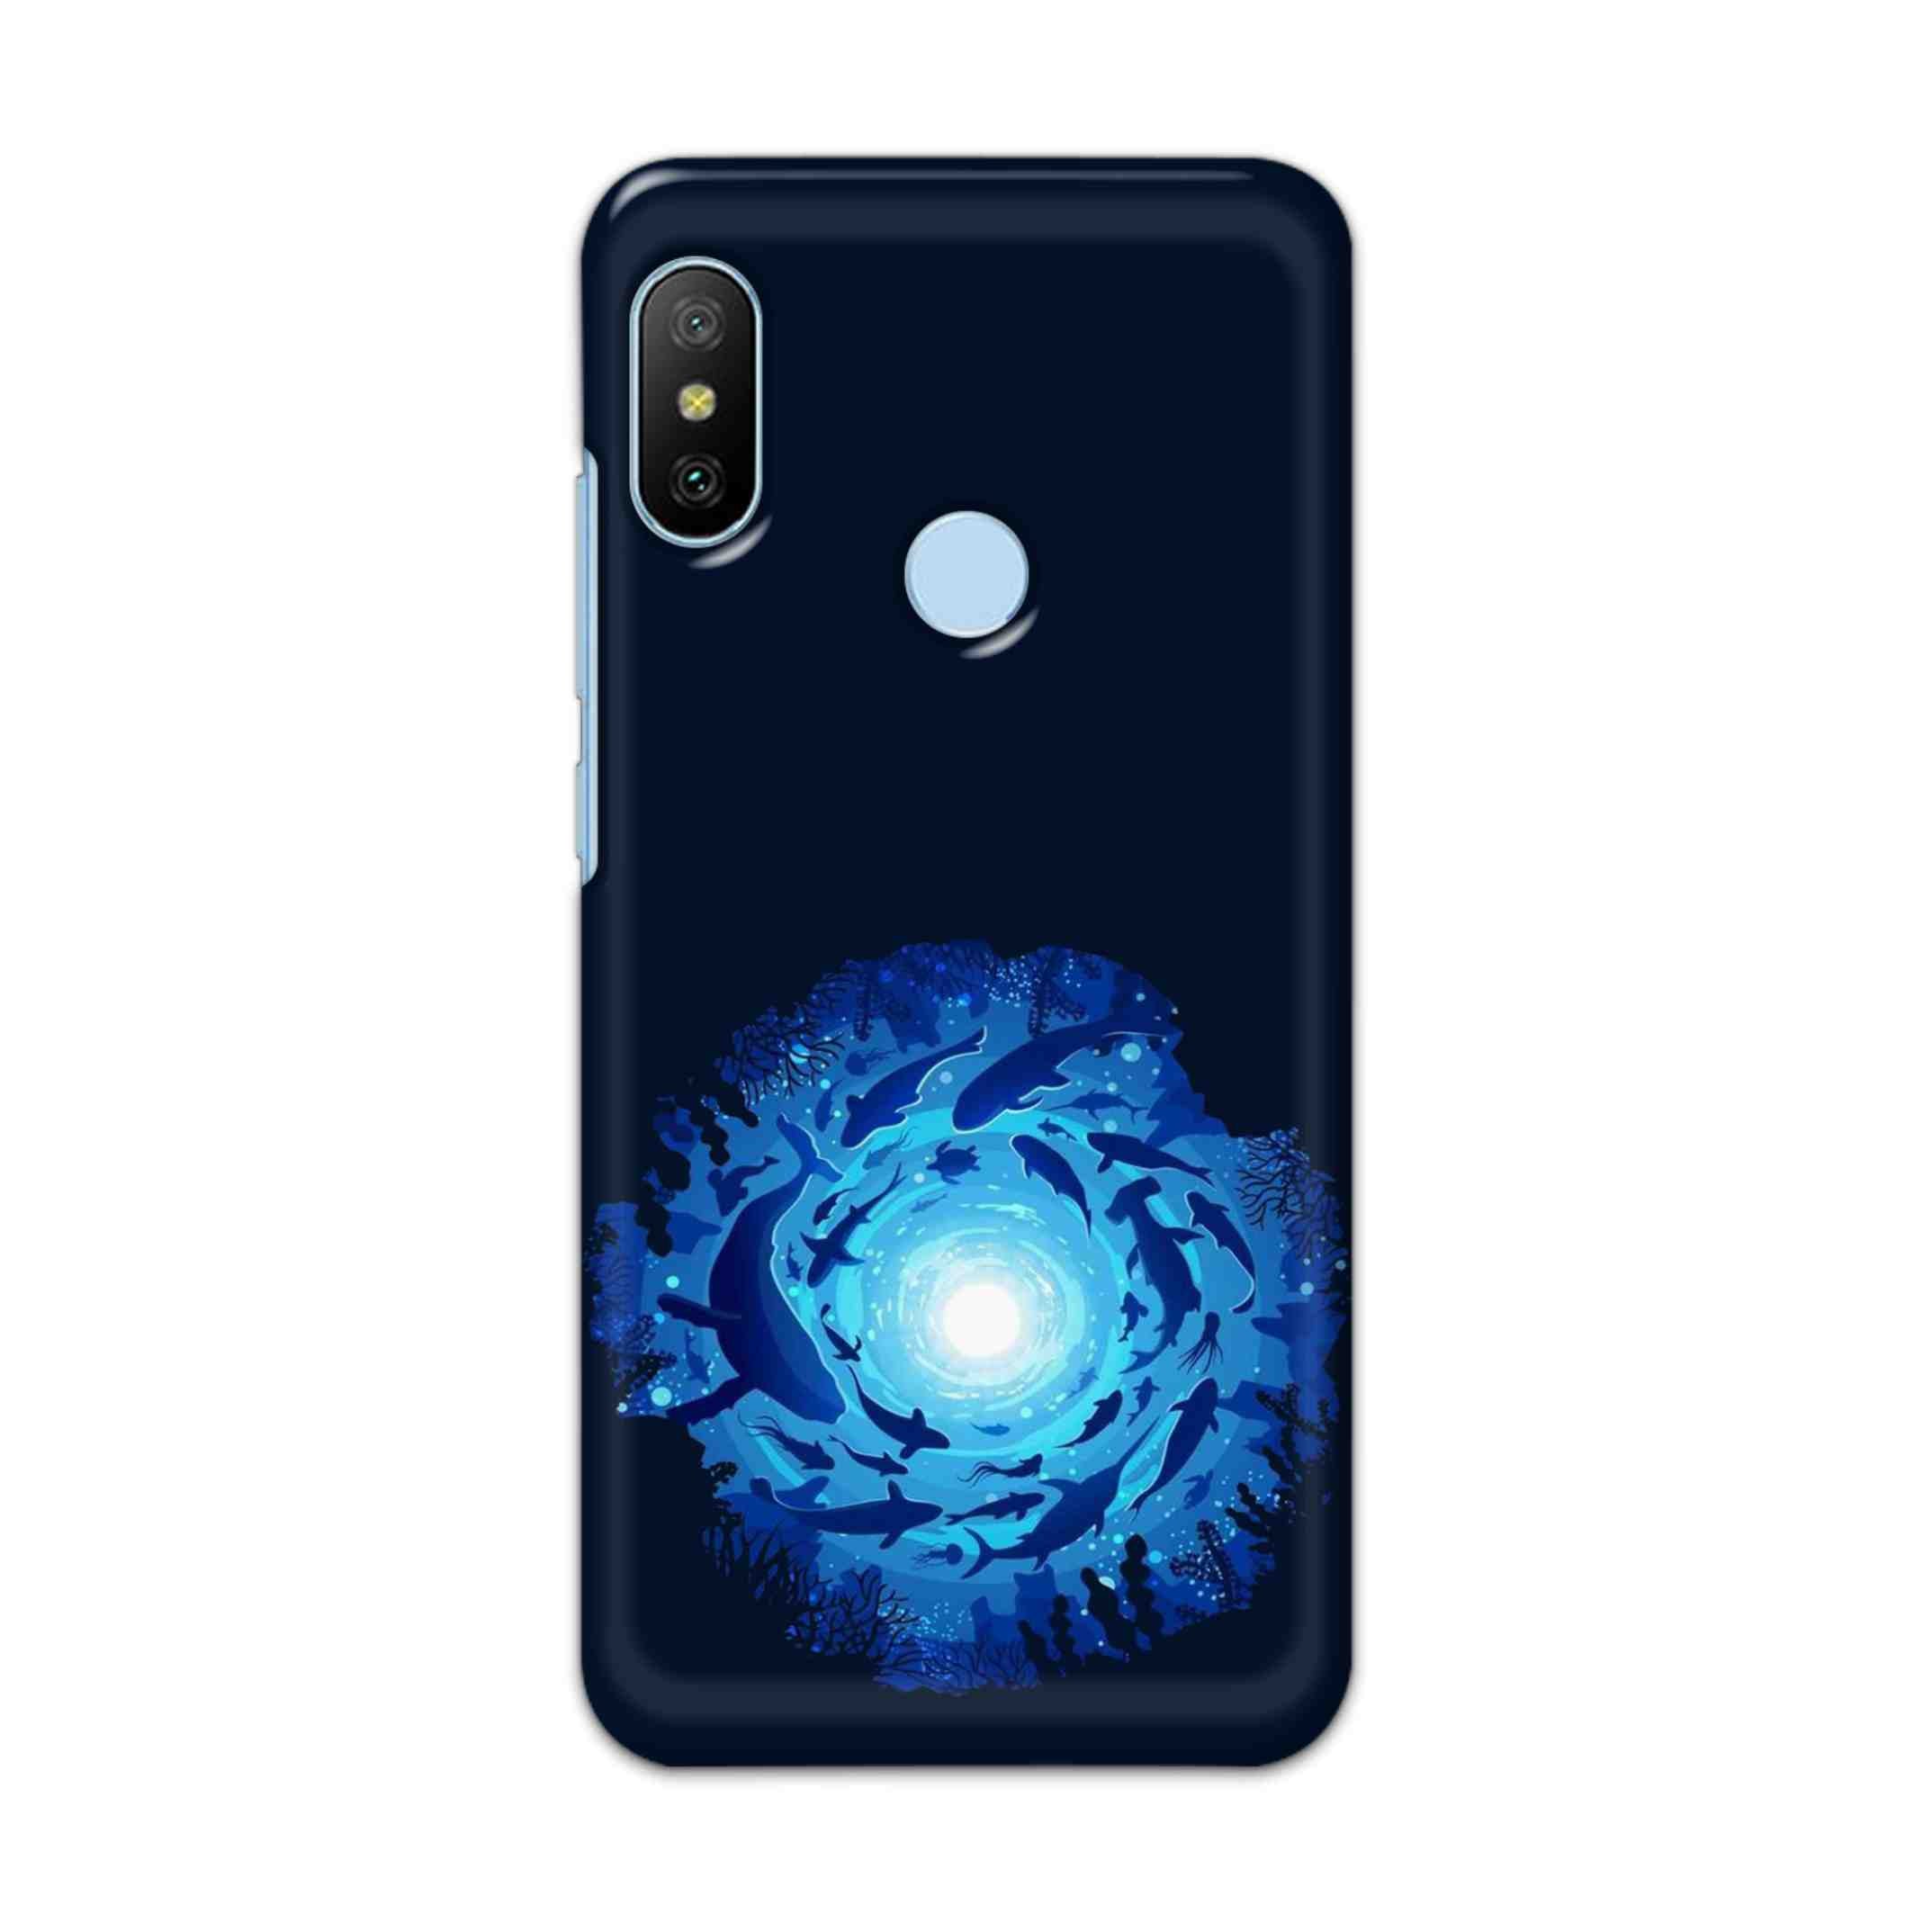 Buy Blue Whale Hard Back Mobile Phone Case/Cover For Xiaomi Redmi 6 Pro Online